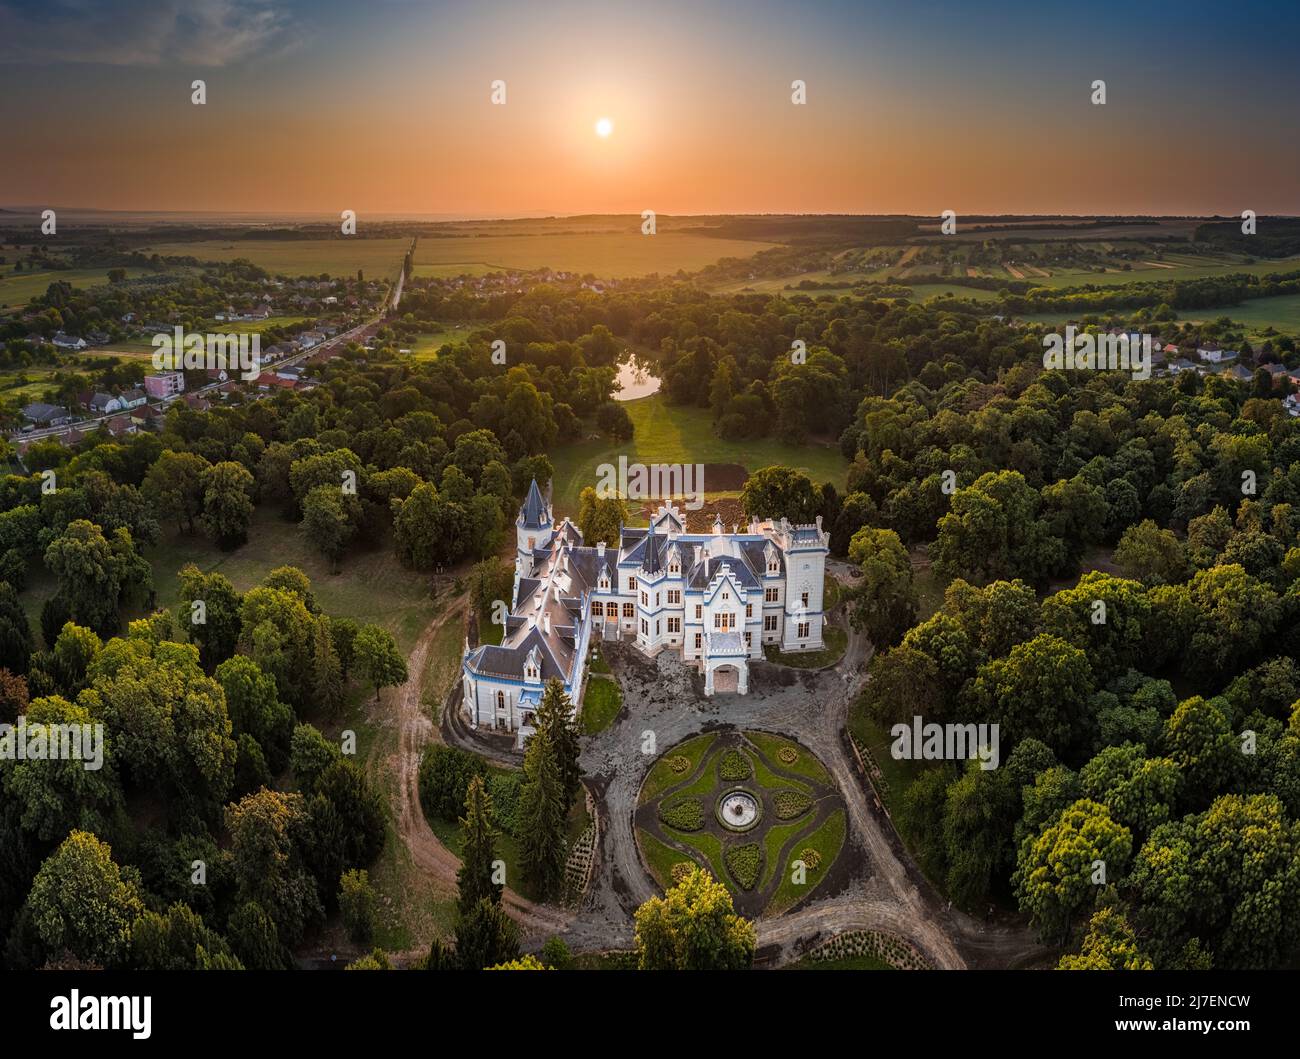 Nadasdladany, Hungary - Aerial panoramic view of the beautiful renovated Nadasdy Mansion (Nadasdy-kastely) at the small village of Nadasdladany with r Stock Photo